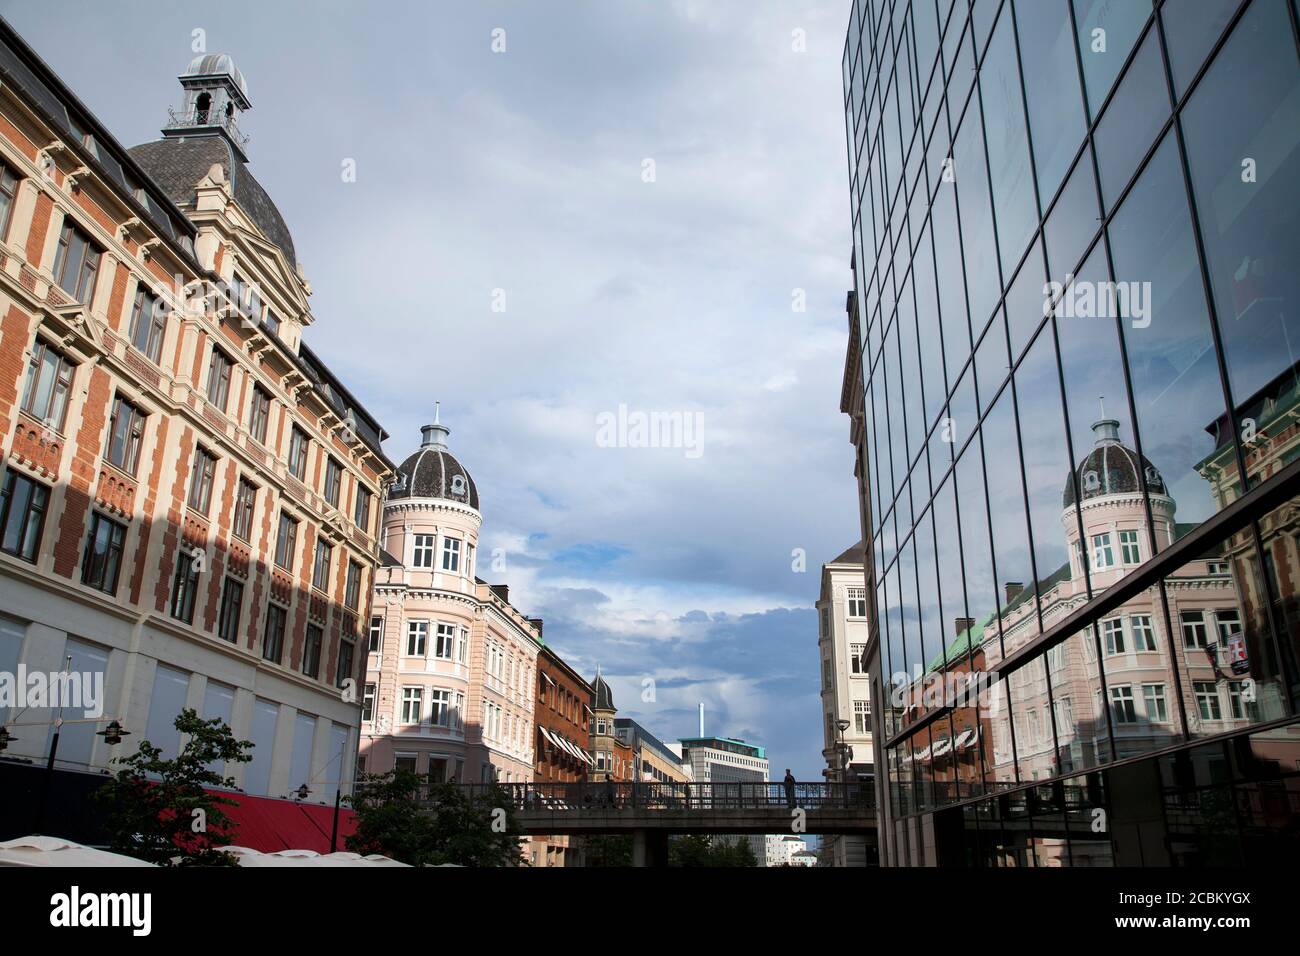 Old and modern architecture, Aarhus, Denmark Stock Photo